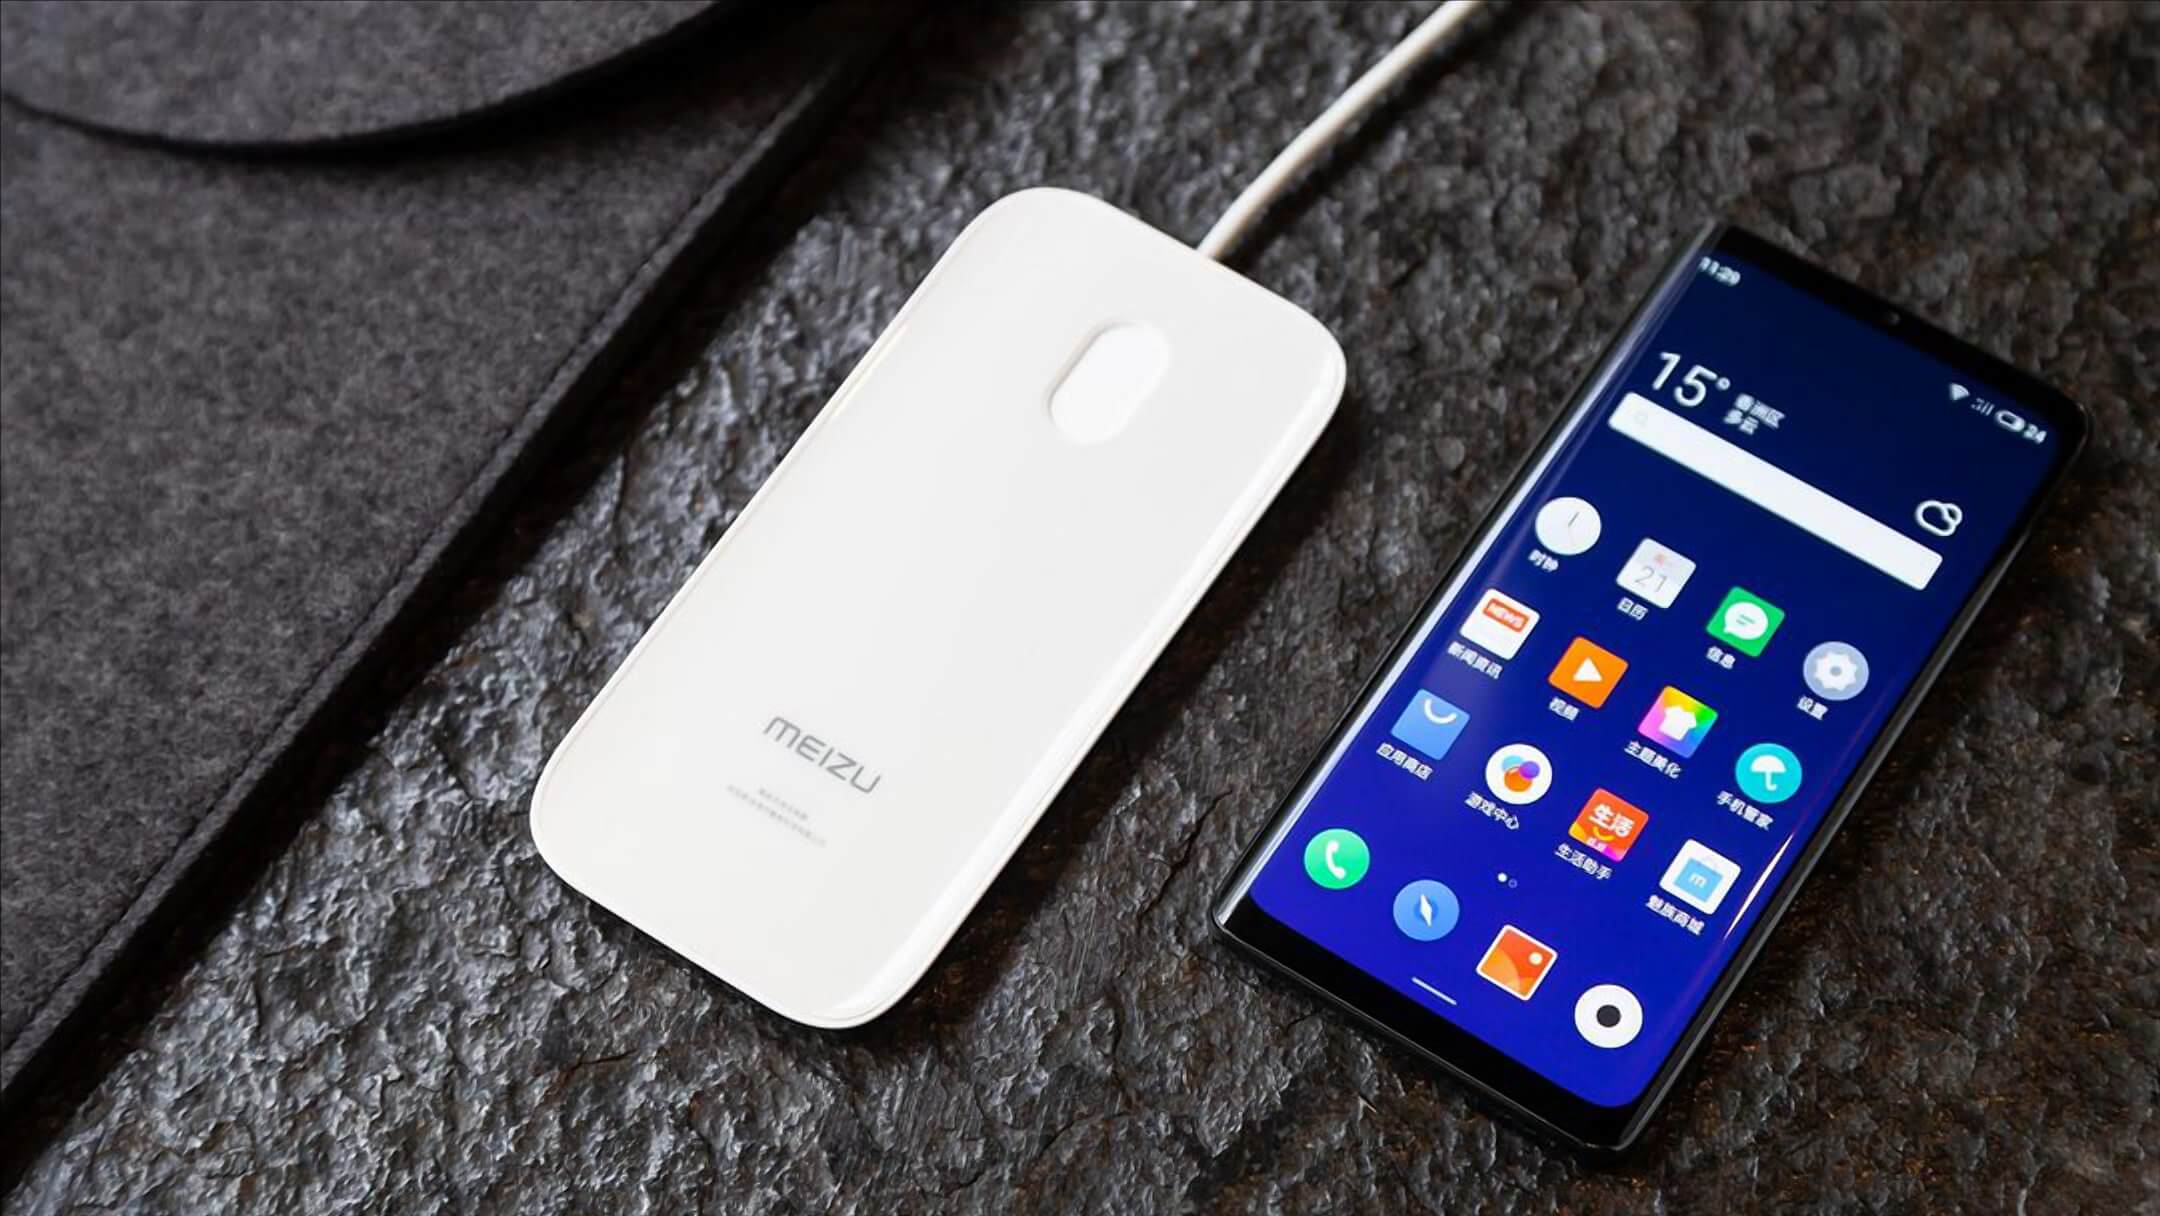 Meizu Zero is the first phone to drop the charging port